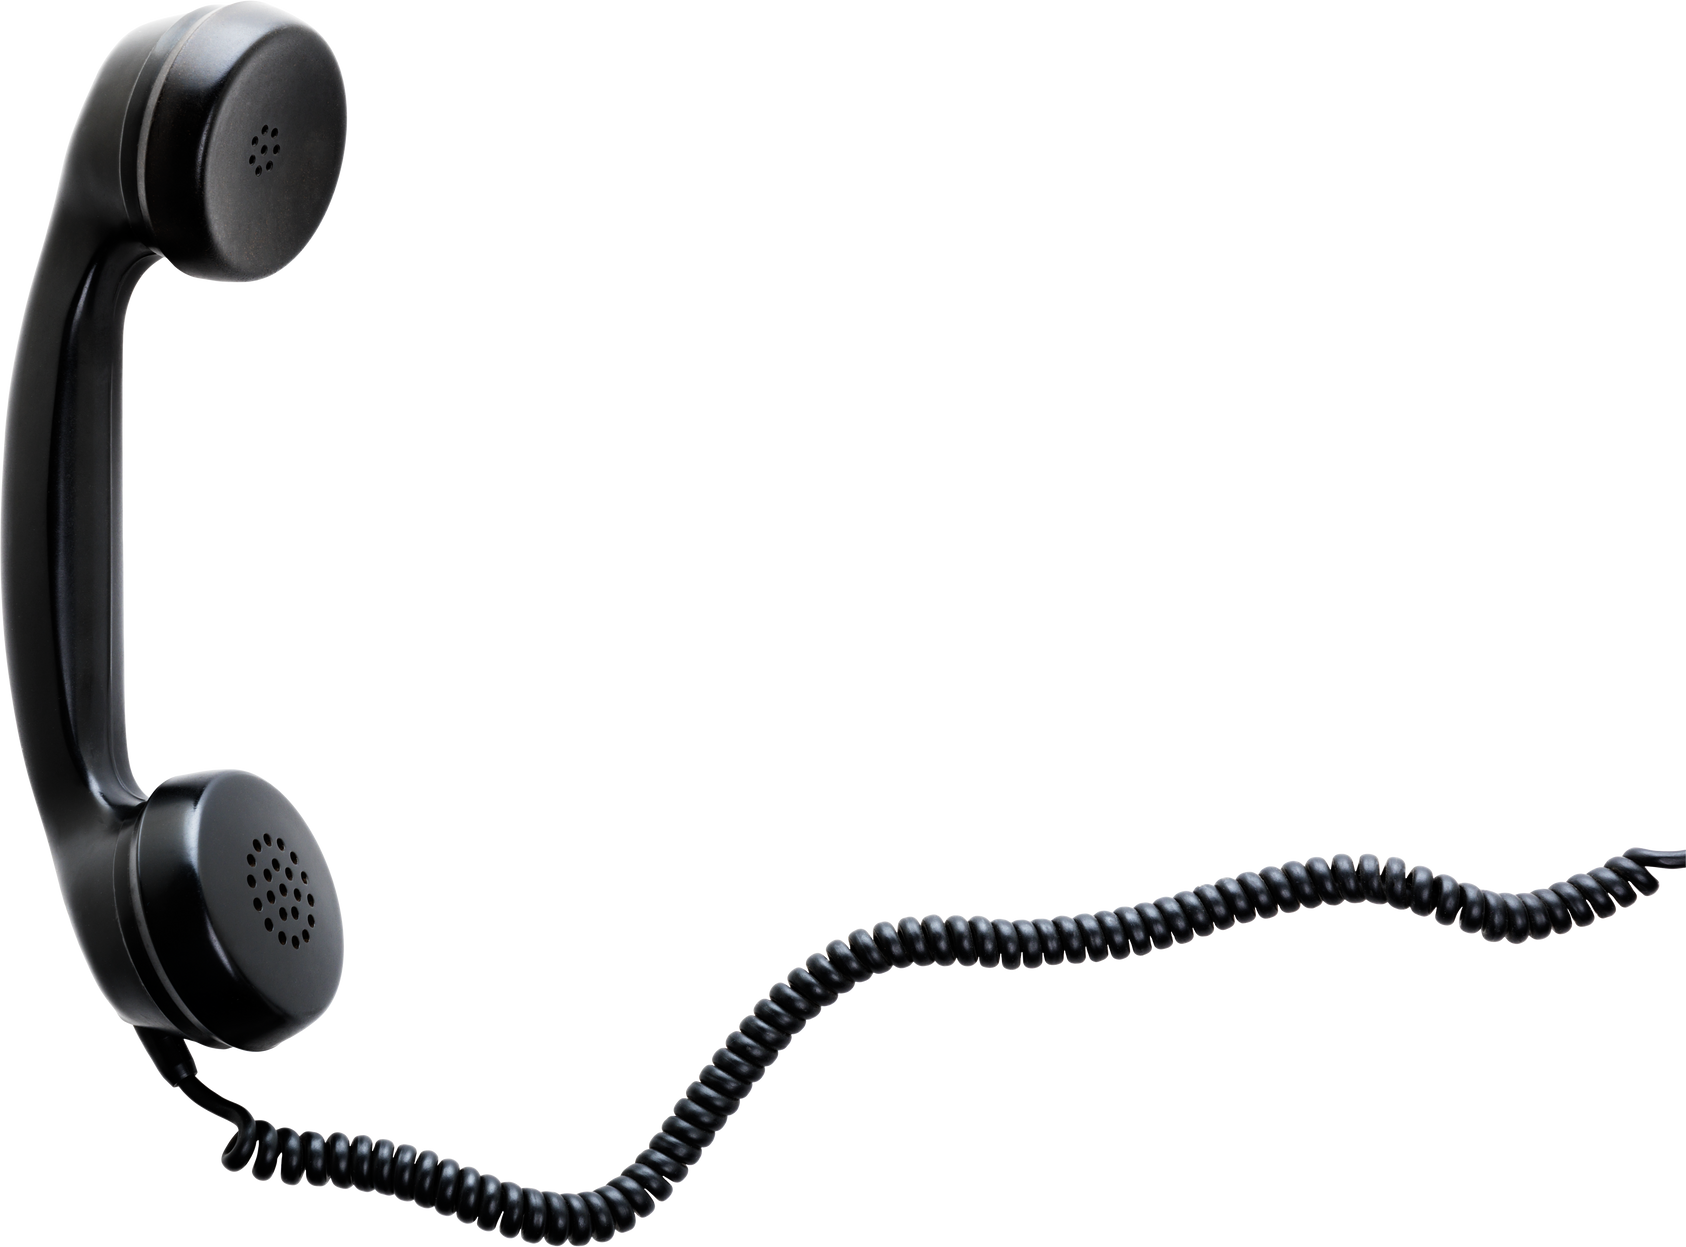 Phone with Cord Cutout